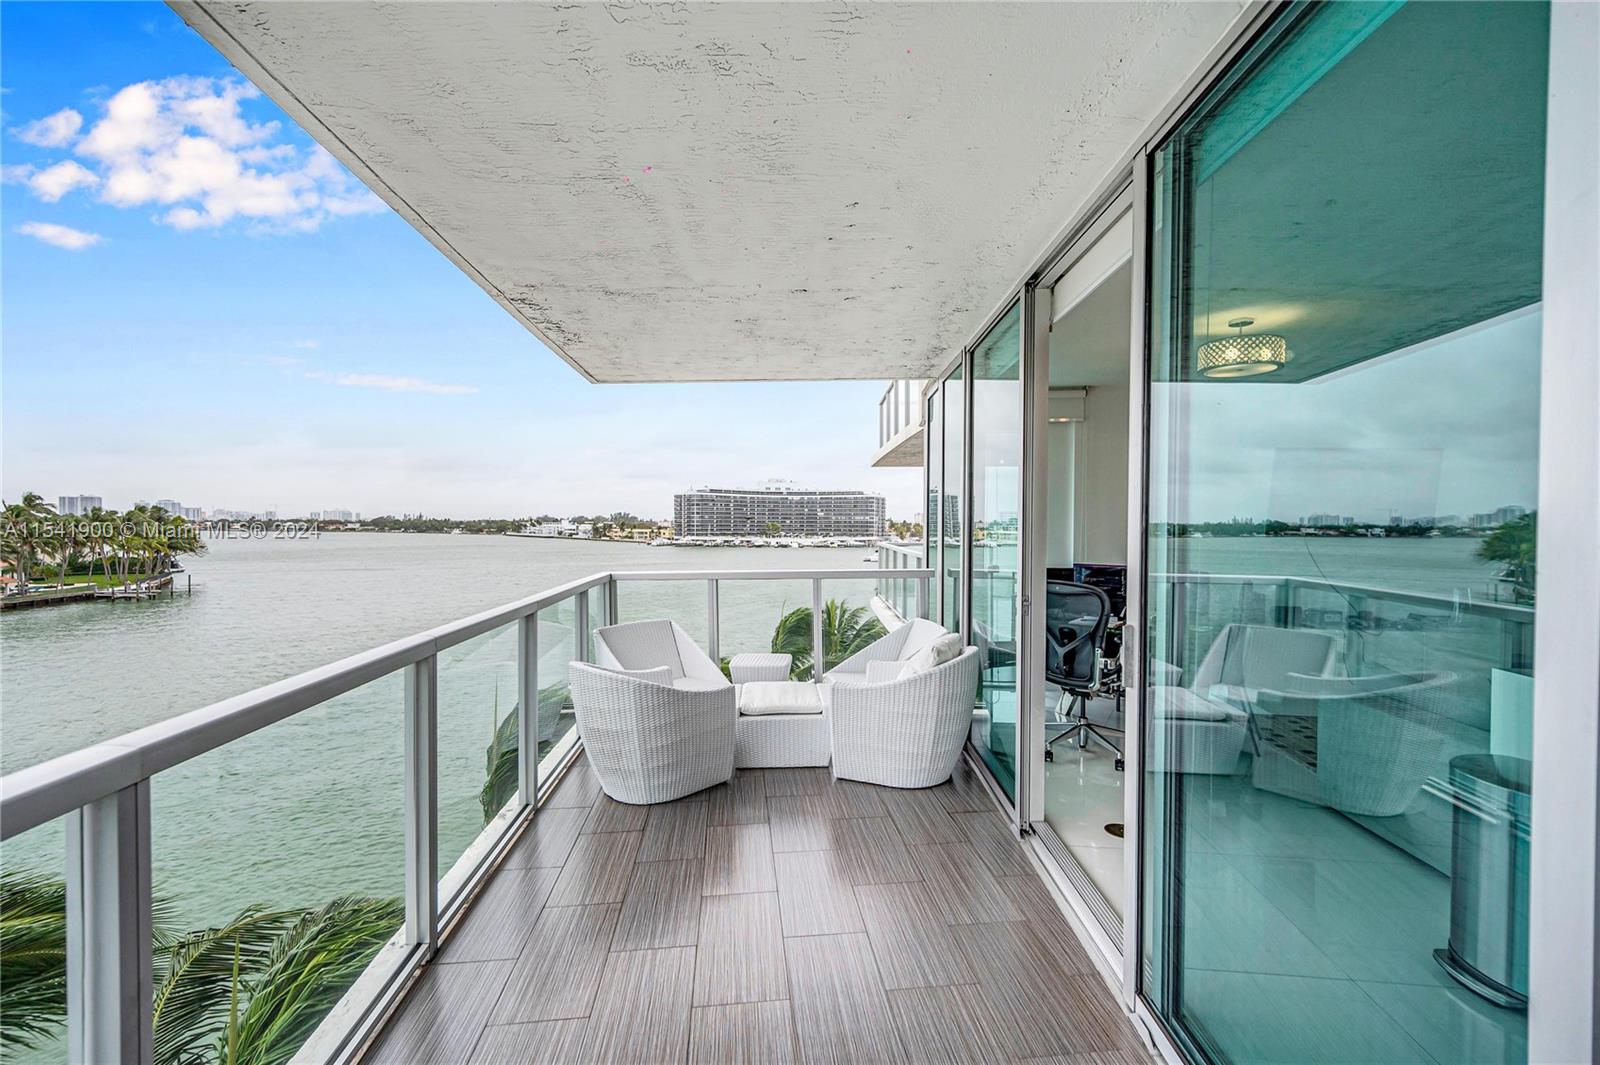 AMAZING 3BR /3B UNIT WITH DIRECT INTERCOASTAL WATER VIEWS. OVERLOOKING ALLISON ISLAND. PLENTY OF NATURAL LIGHT AND LIVING SPACE FOR ENTERTAINING GUEST. THIS CORNER UNIT HAS A SEMI-PRIVATE ELEVATOR THAT LEADS DOWN TO THE PARKING GARAGE. WALKING DISTANCE TO THE BEACH. COMPLEMENTRY 24HR VALET. FULL SERVICE GYM. JUST A FIVE MINUTE DRIVE TO SOUTH BEACH AND AN ARRAY OF INTERNATIONAL CUISINES, SHOPPING , PUBLIC PARKS AND NIGHT LIFE